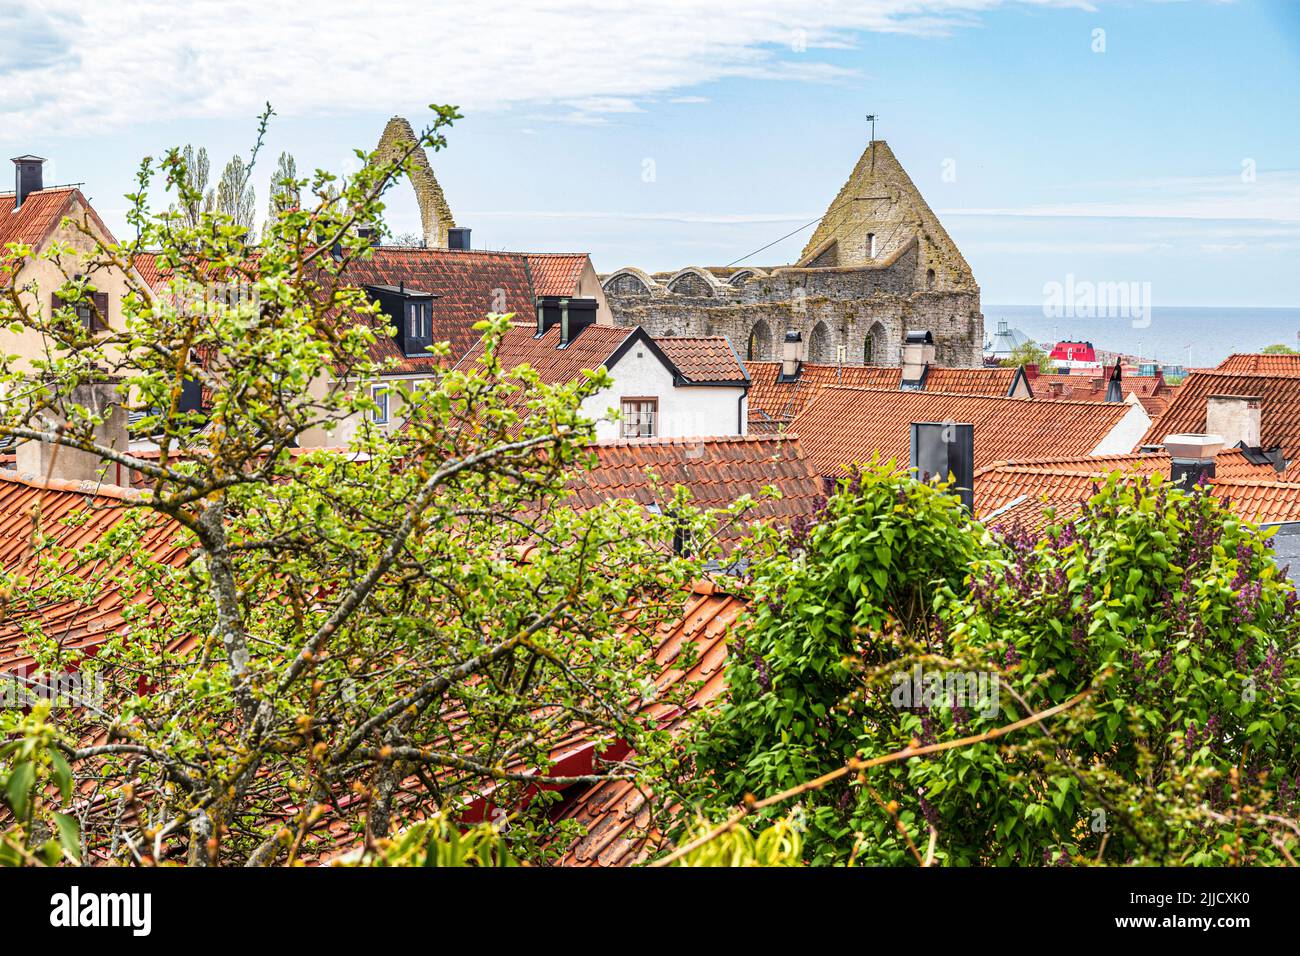 The ruins of St Katarina church in the Great Square (Stora Torget) seen over the rooves of the medieval town of Visby on the island of Gotland in the Stock Photo